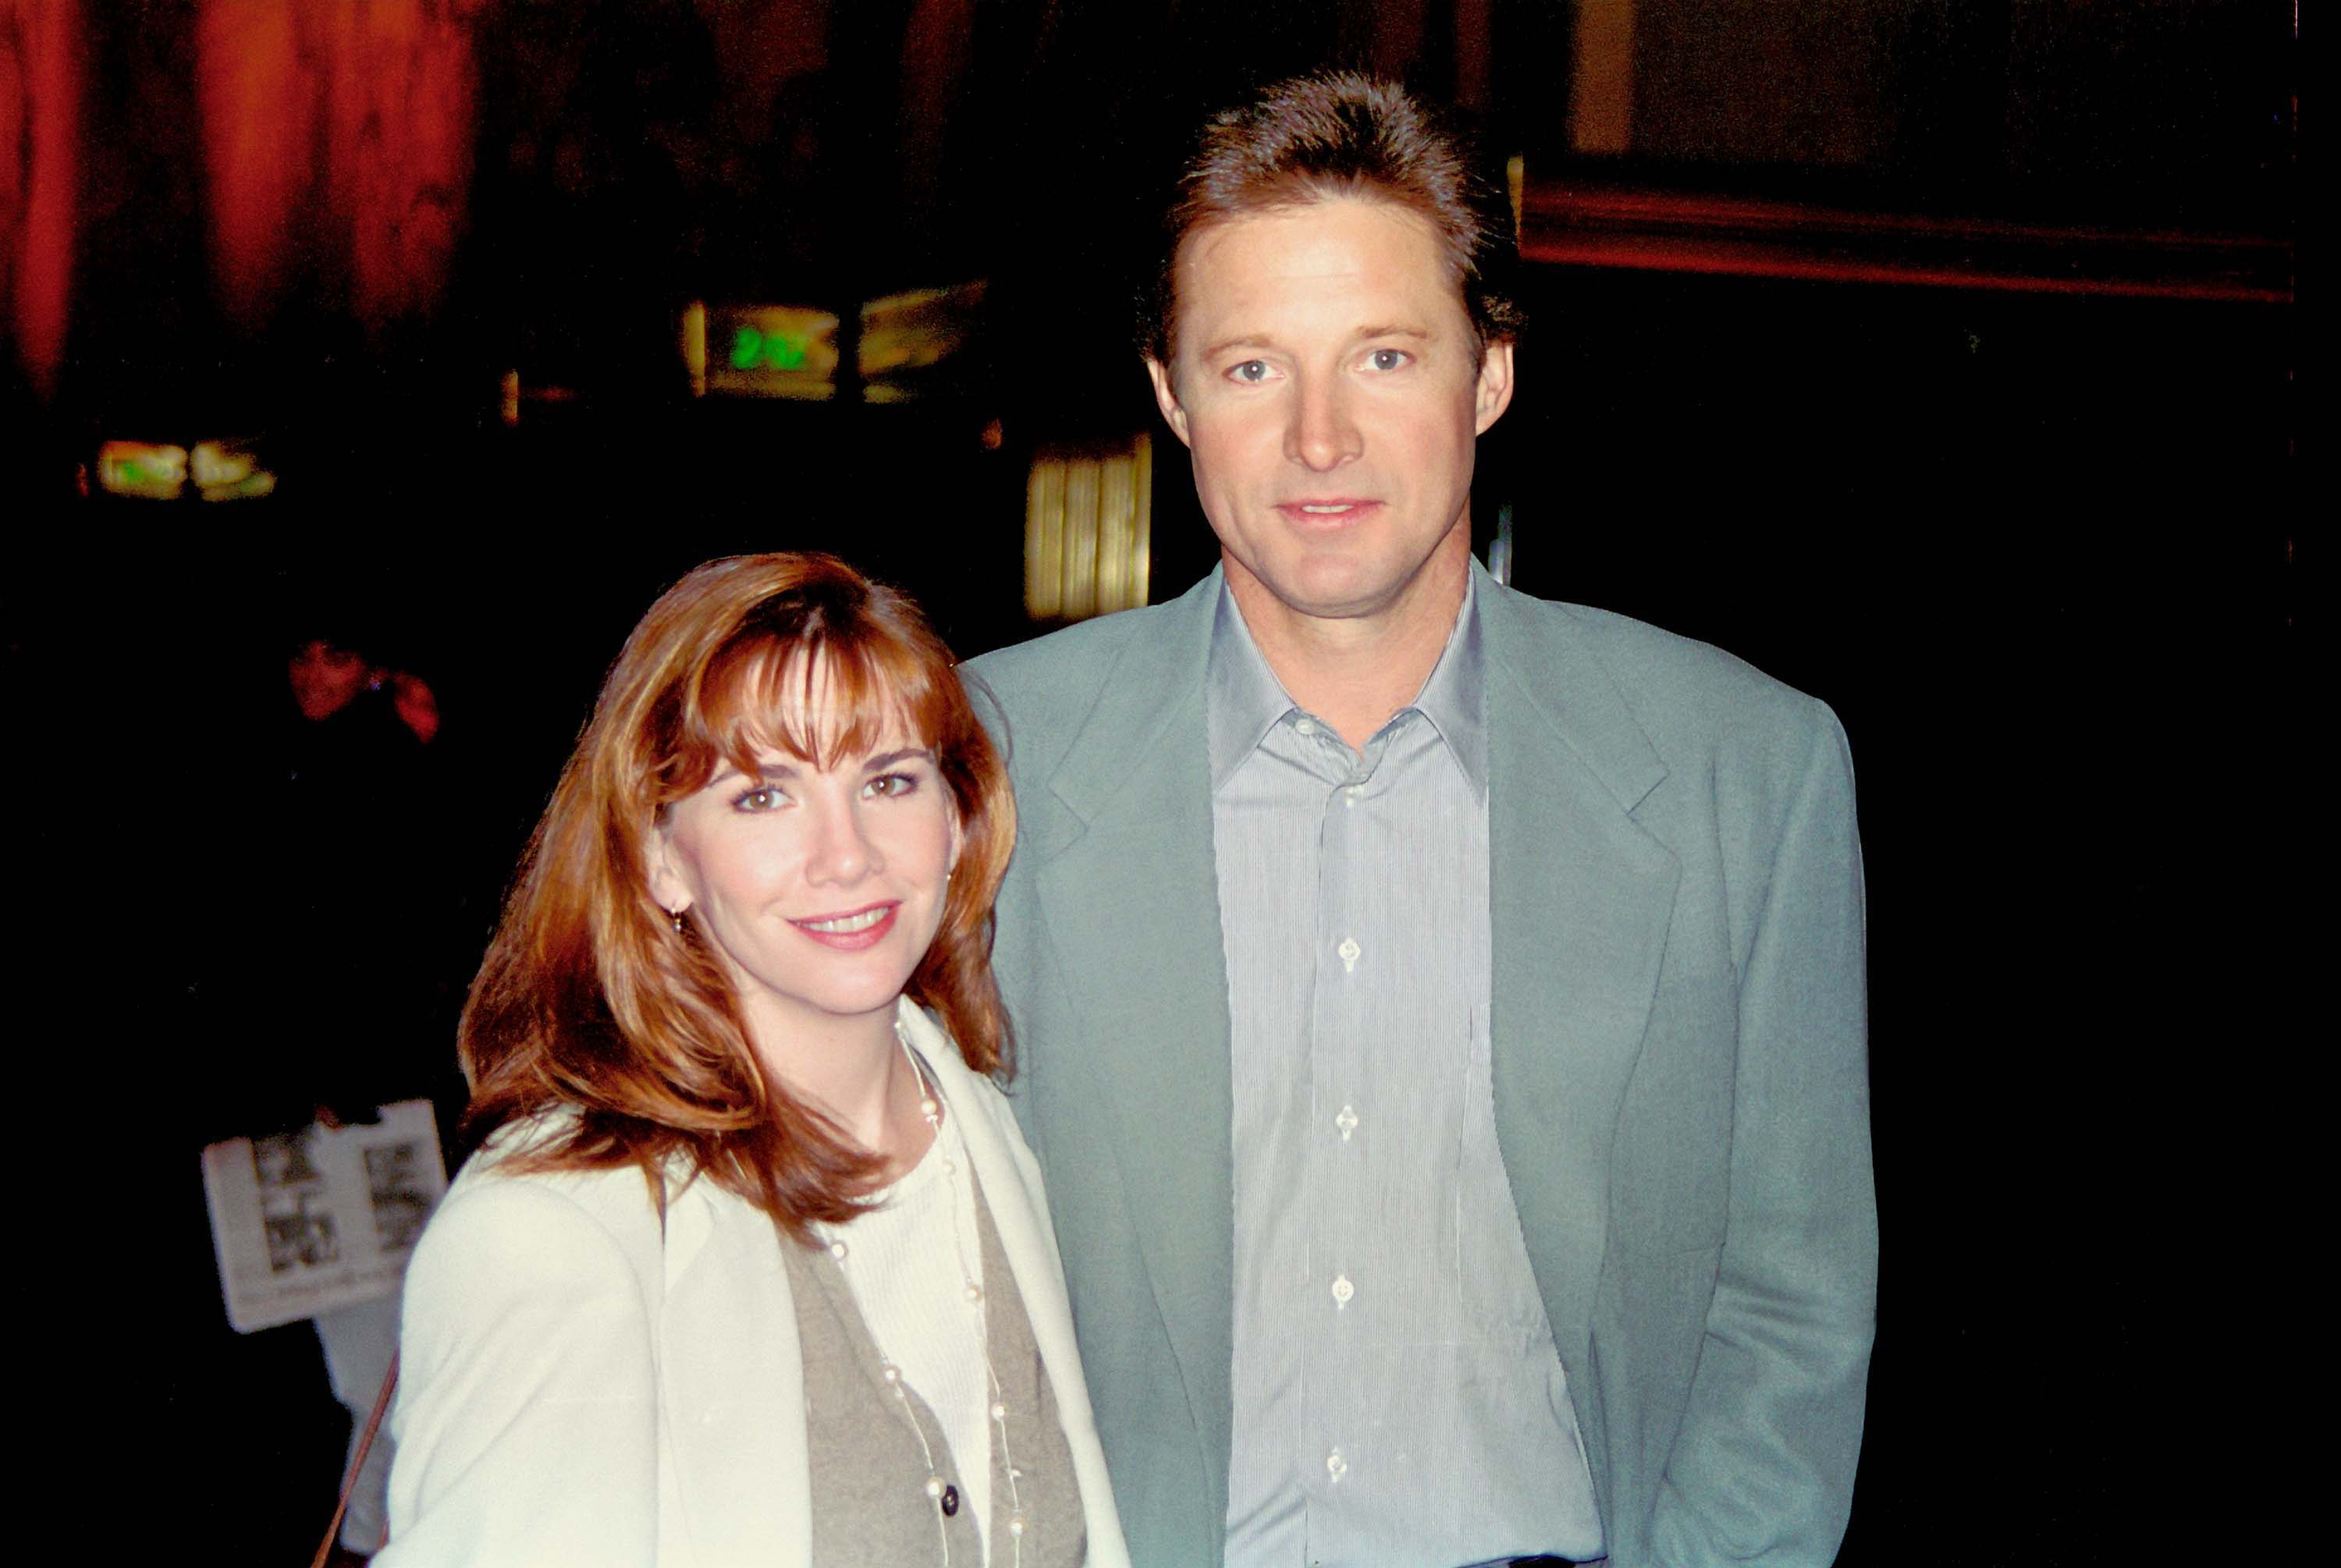 Melissa Gilbert and Bruce Boxleitner photographed together out on the town.